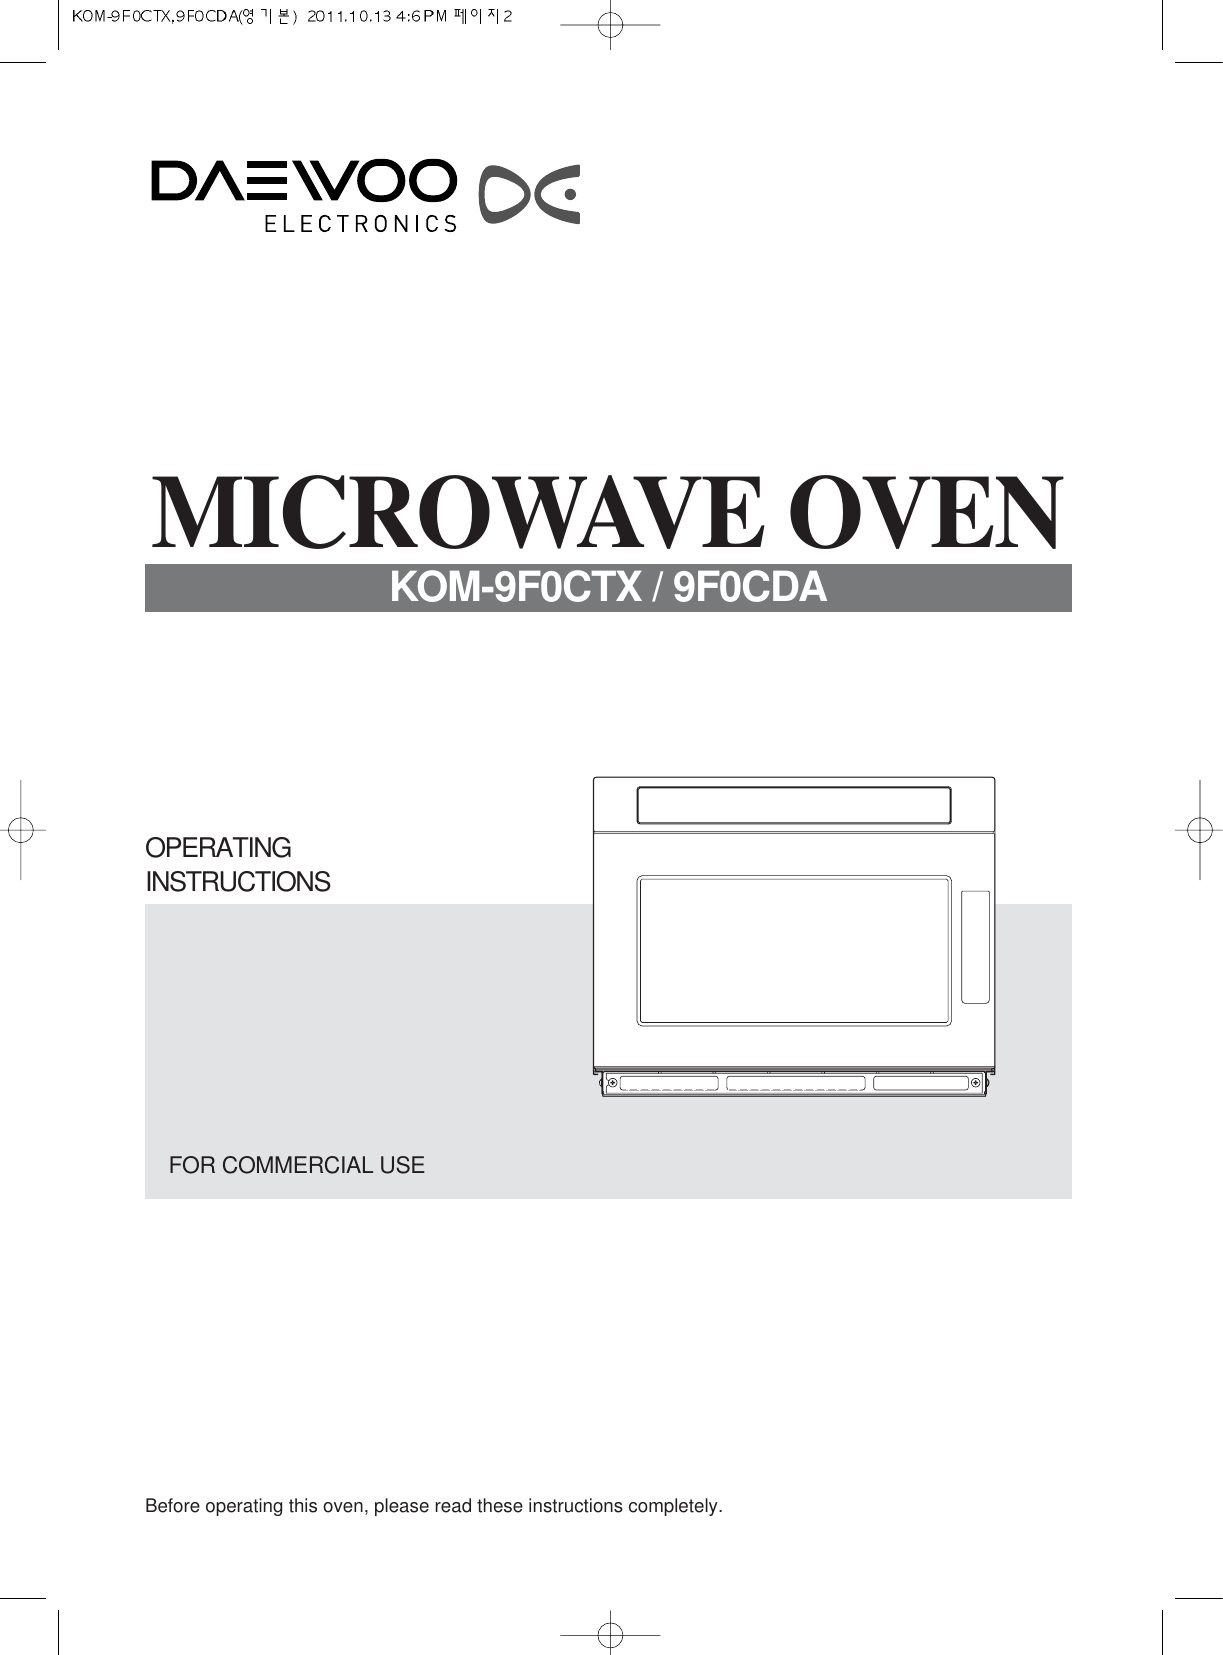 Before operating this oven, please read these instructions completely.OPERATINGINSTRUCTIONSMICROWAVE OVENKOM-9F0CTX / 9F0CDAFOR COMMERCIAL USE